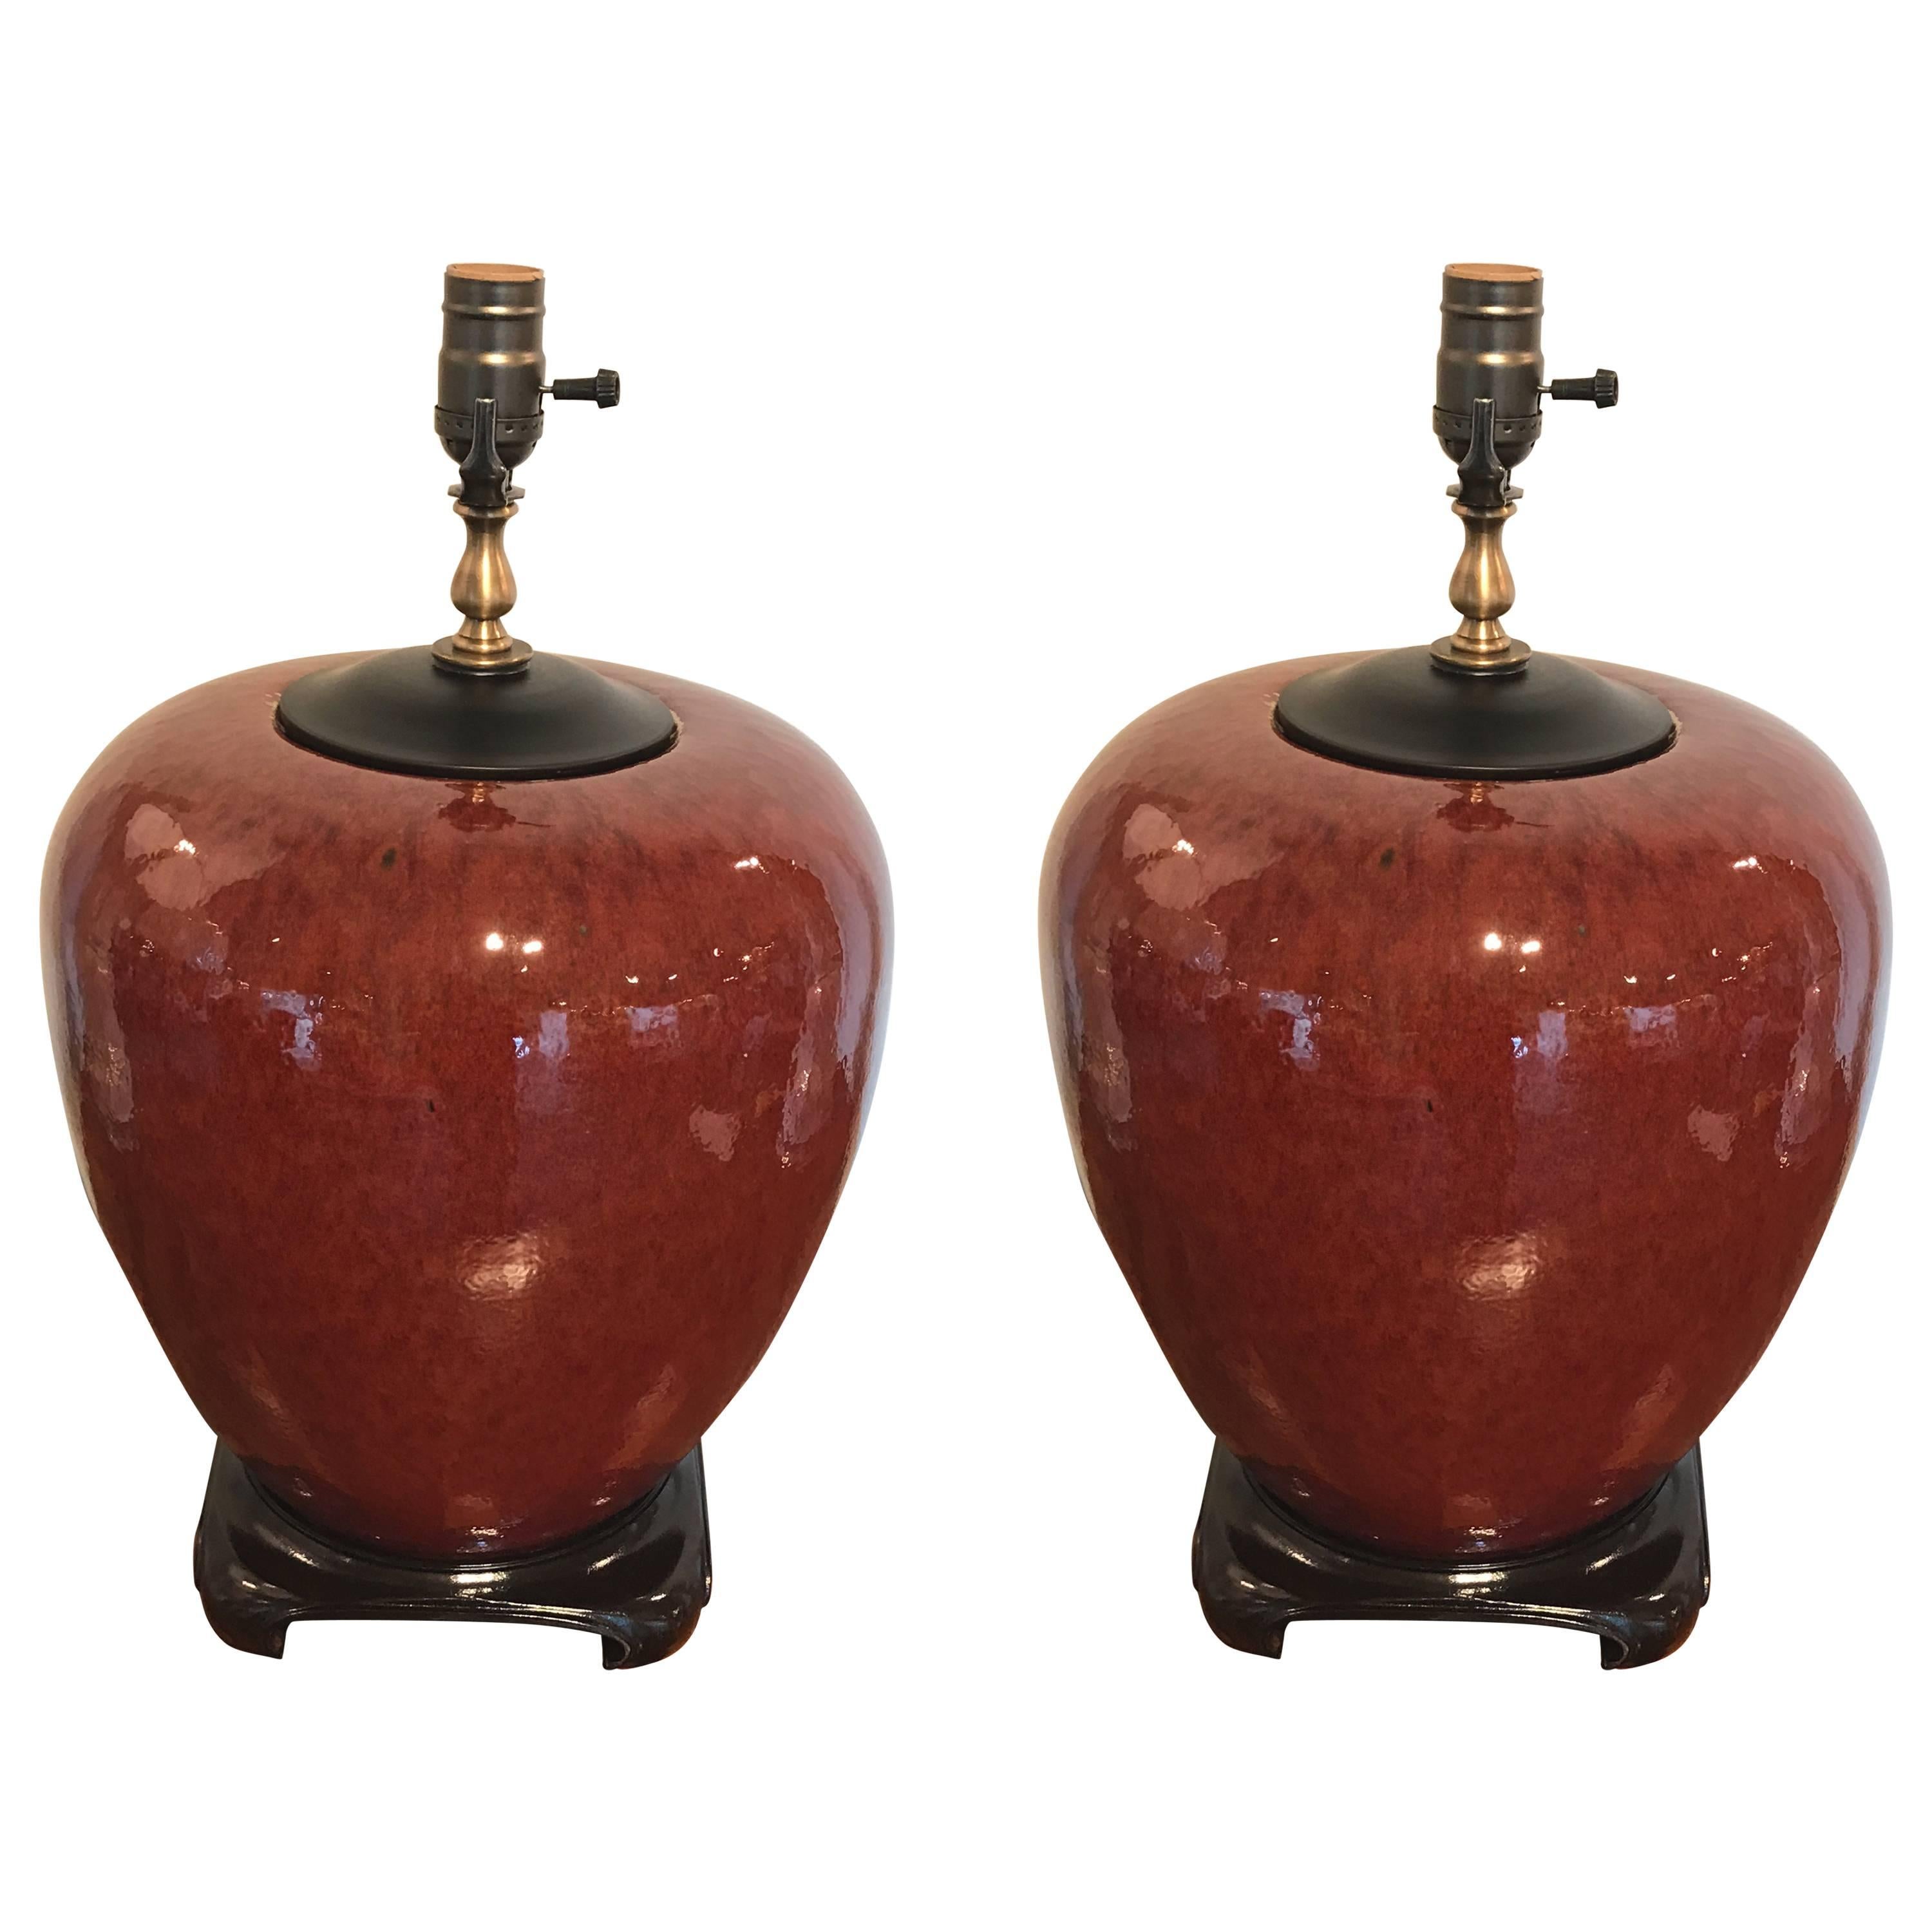 Pair of Fine Sung De Beouf Vases, Now as Lamps